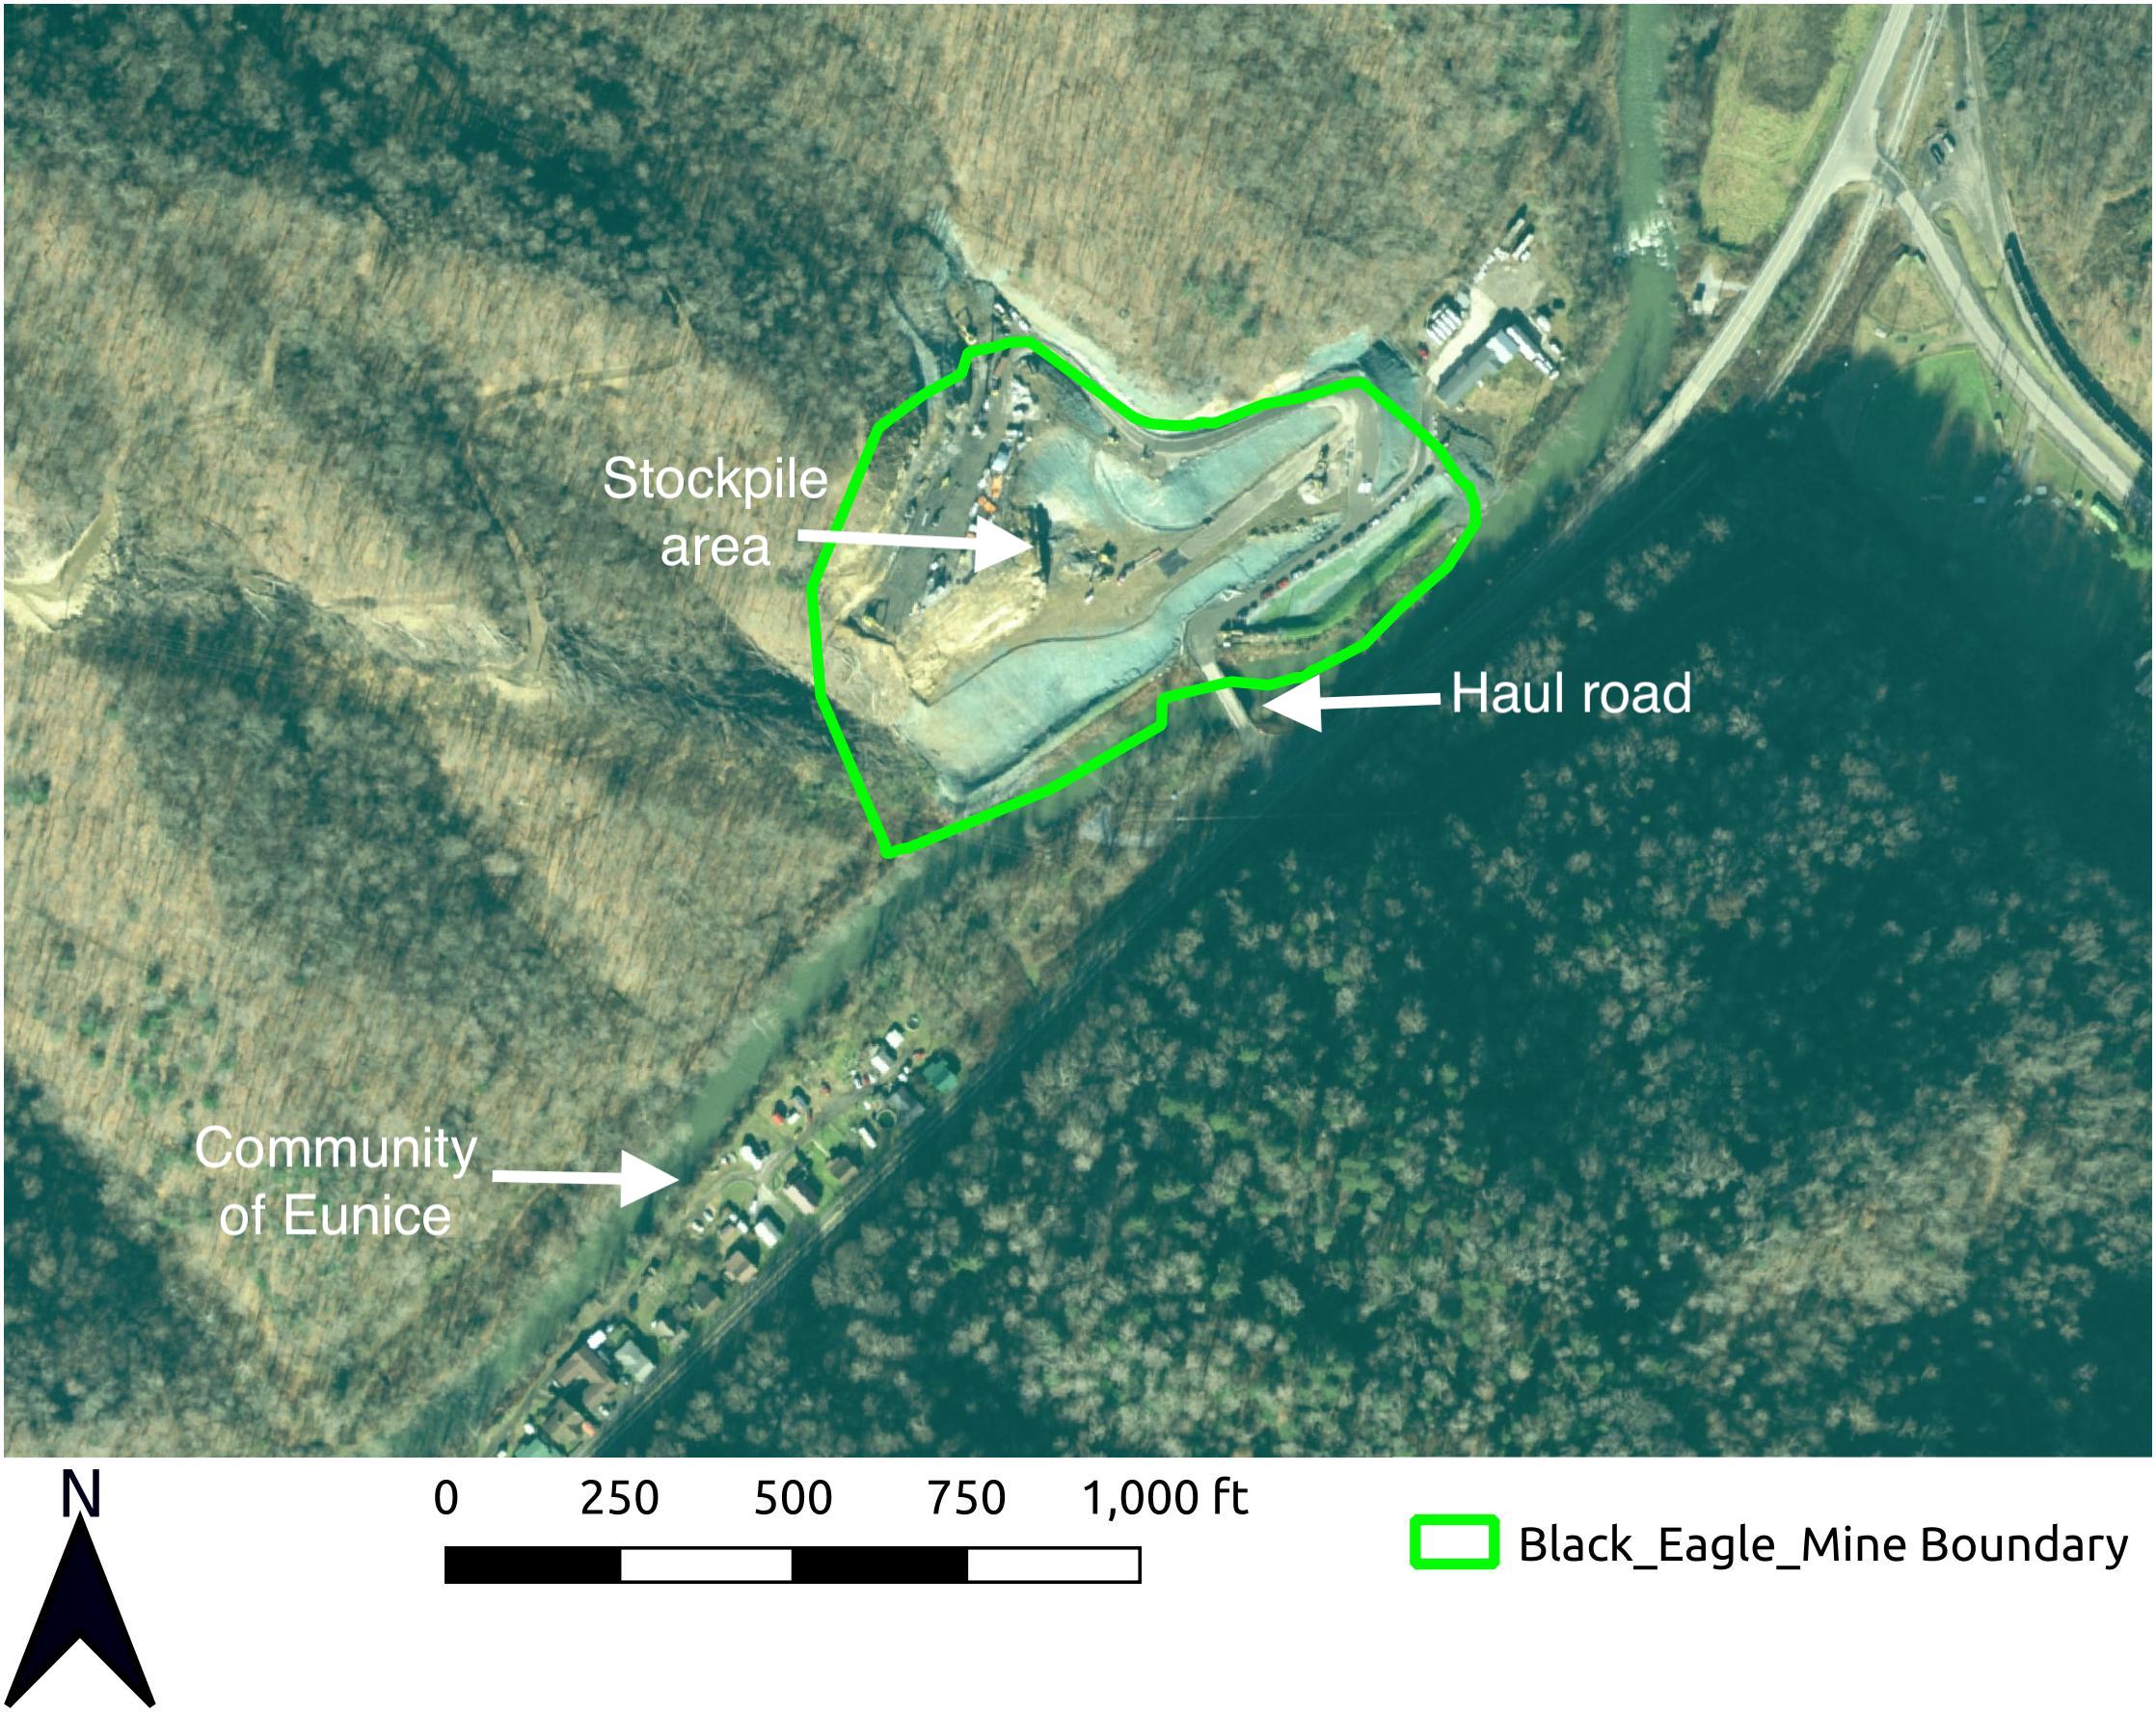 This map shows the proximity of Eunice to the boundary of the Black Eagle Mine and the haul road where hundreds of trucks stir up coal mine dust daily. Map by Matt Hepler 